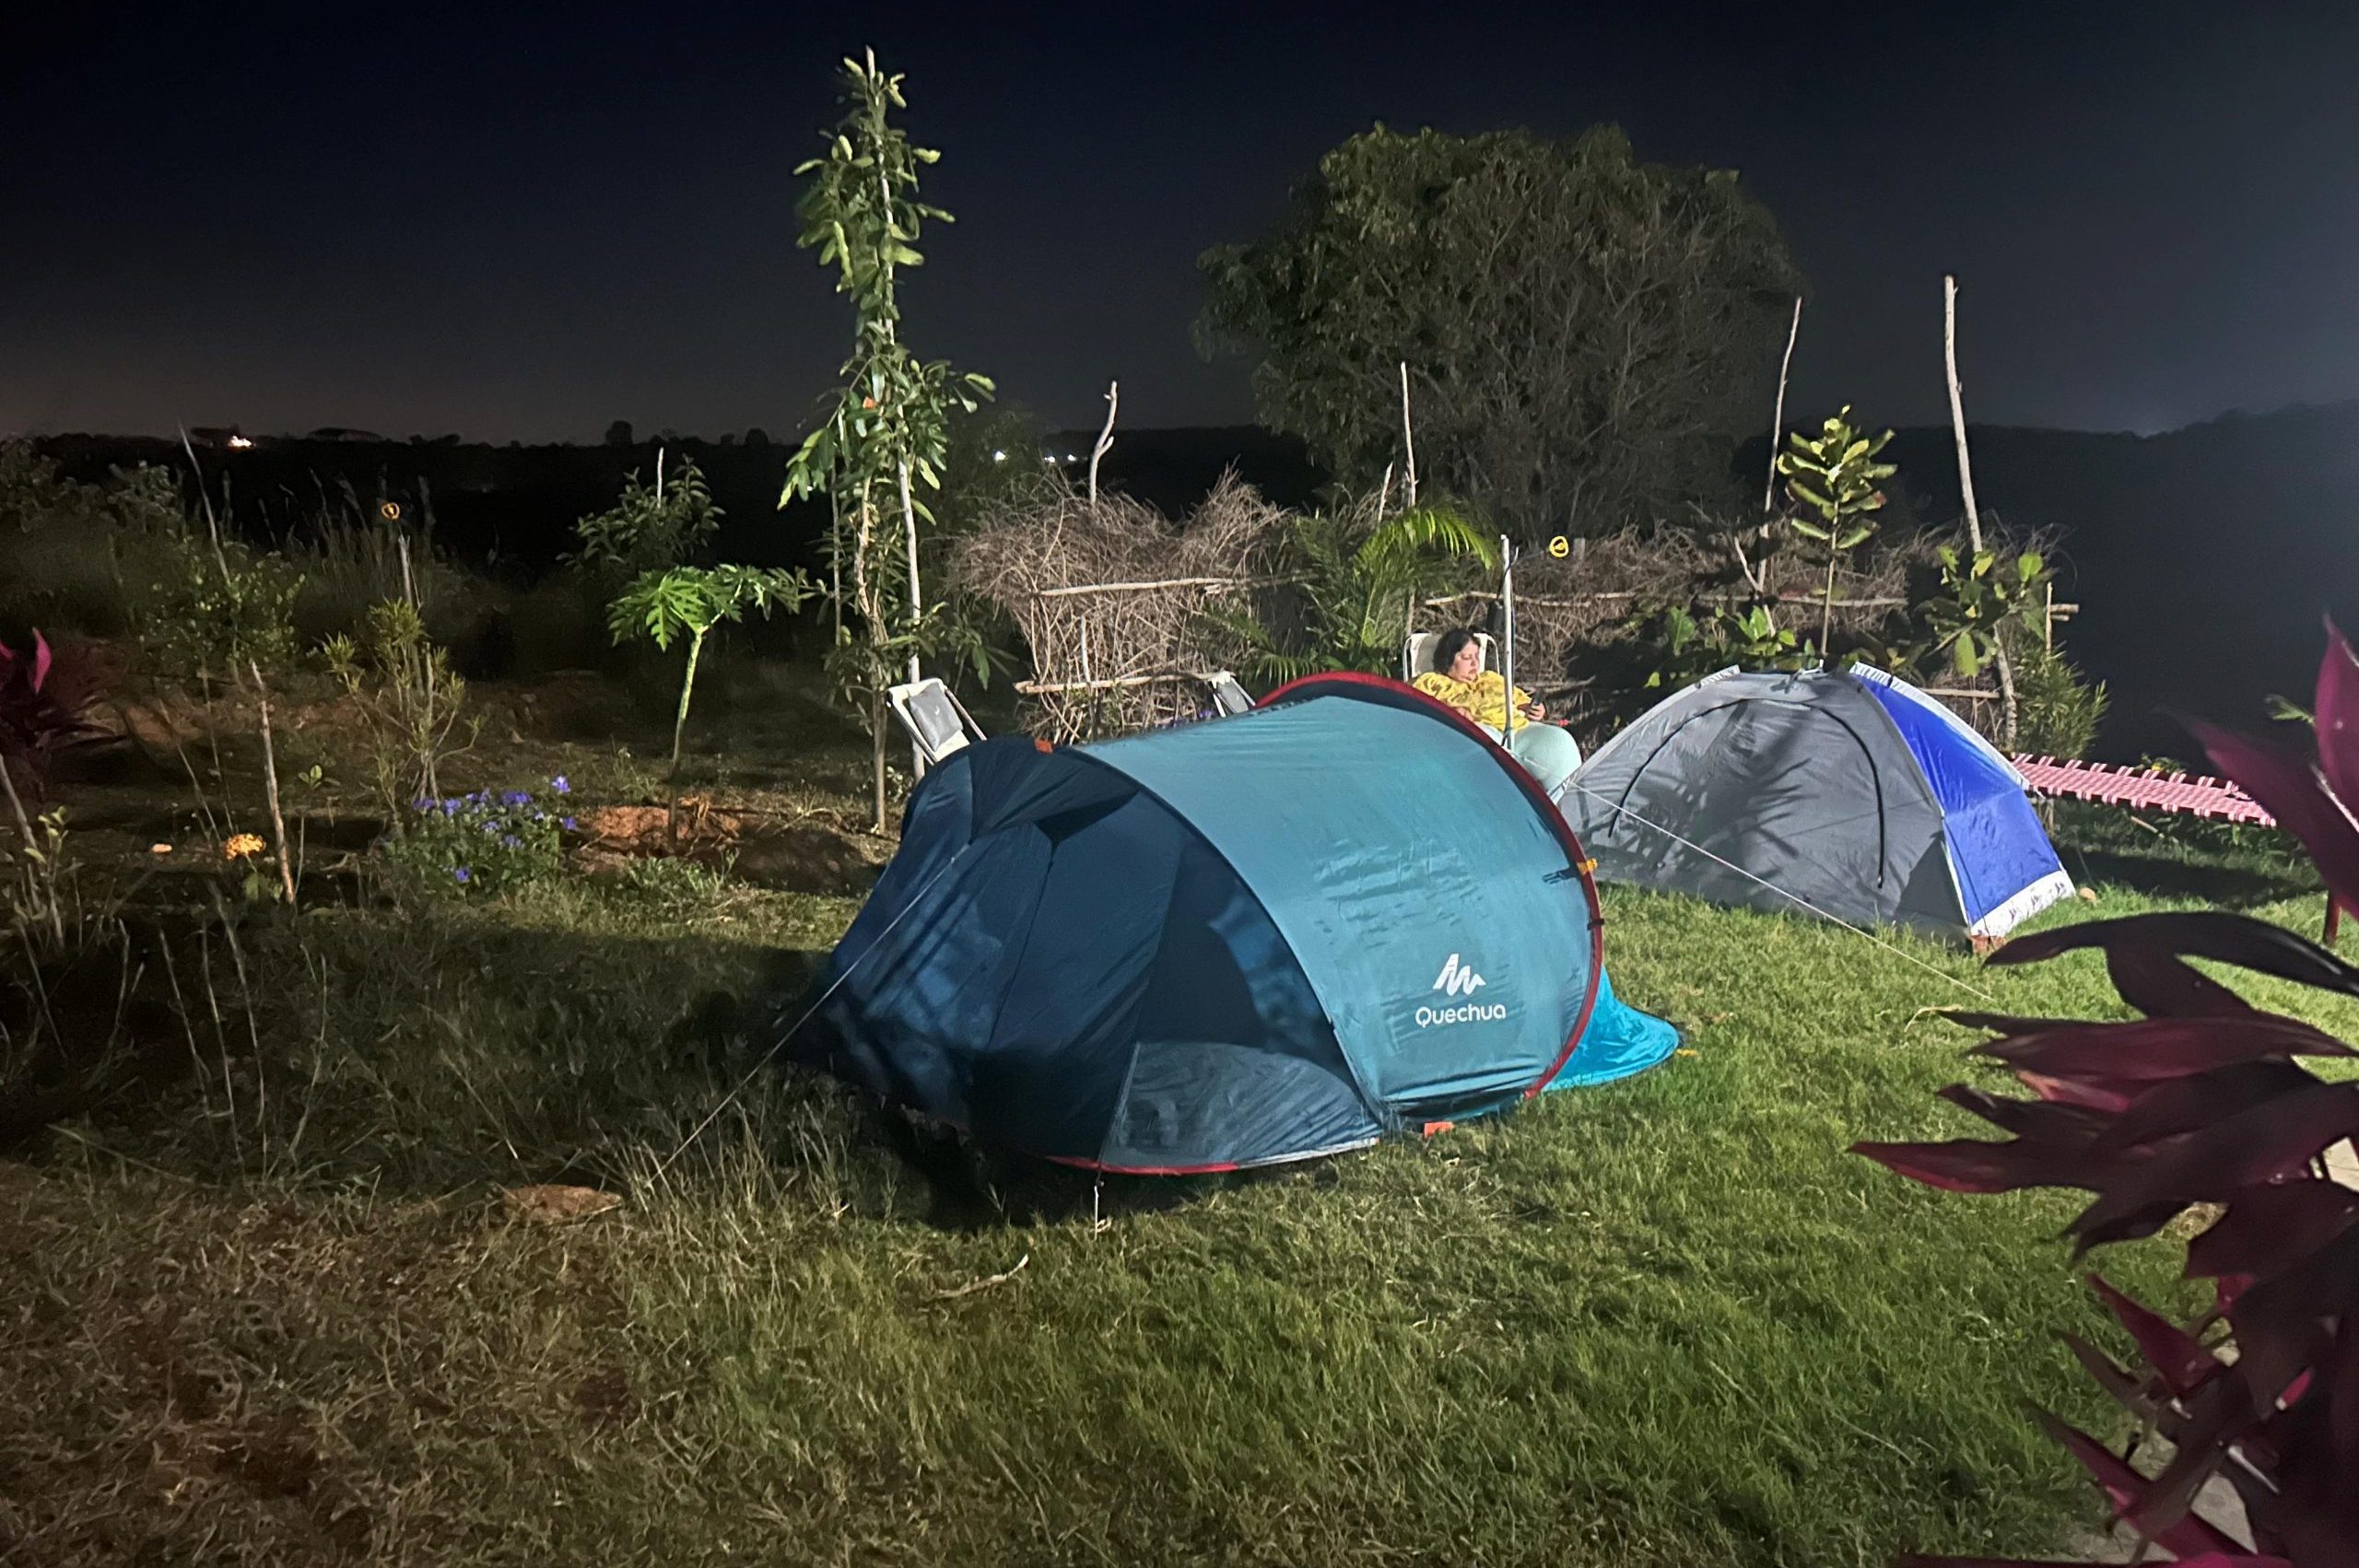 Camping tents in ecoland farms